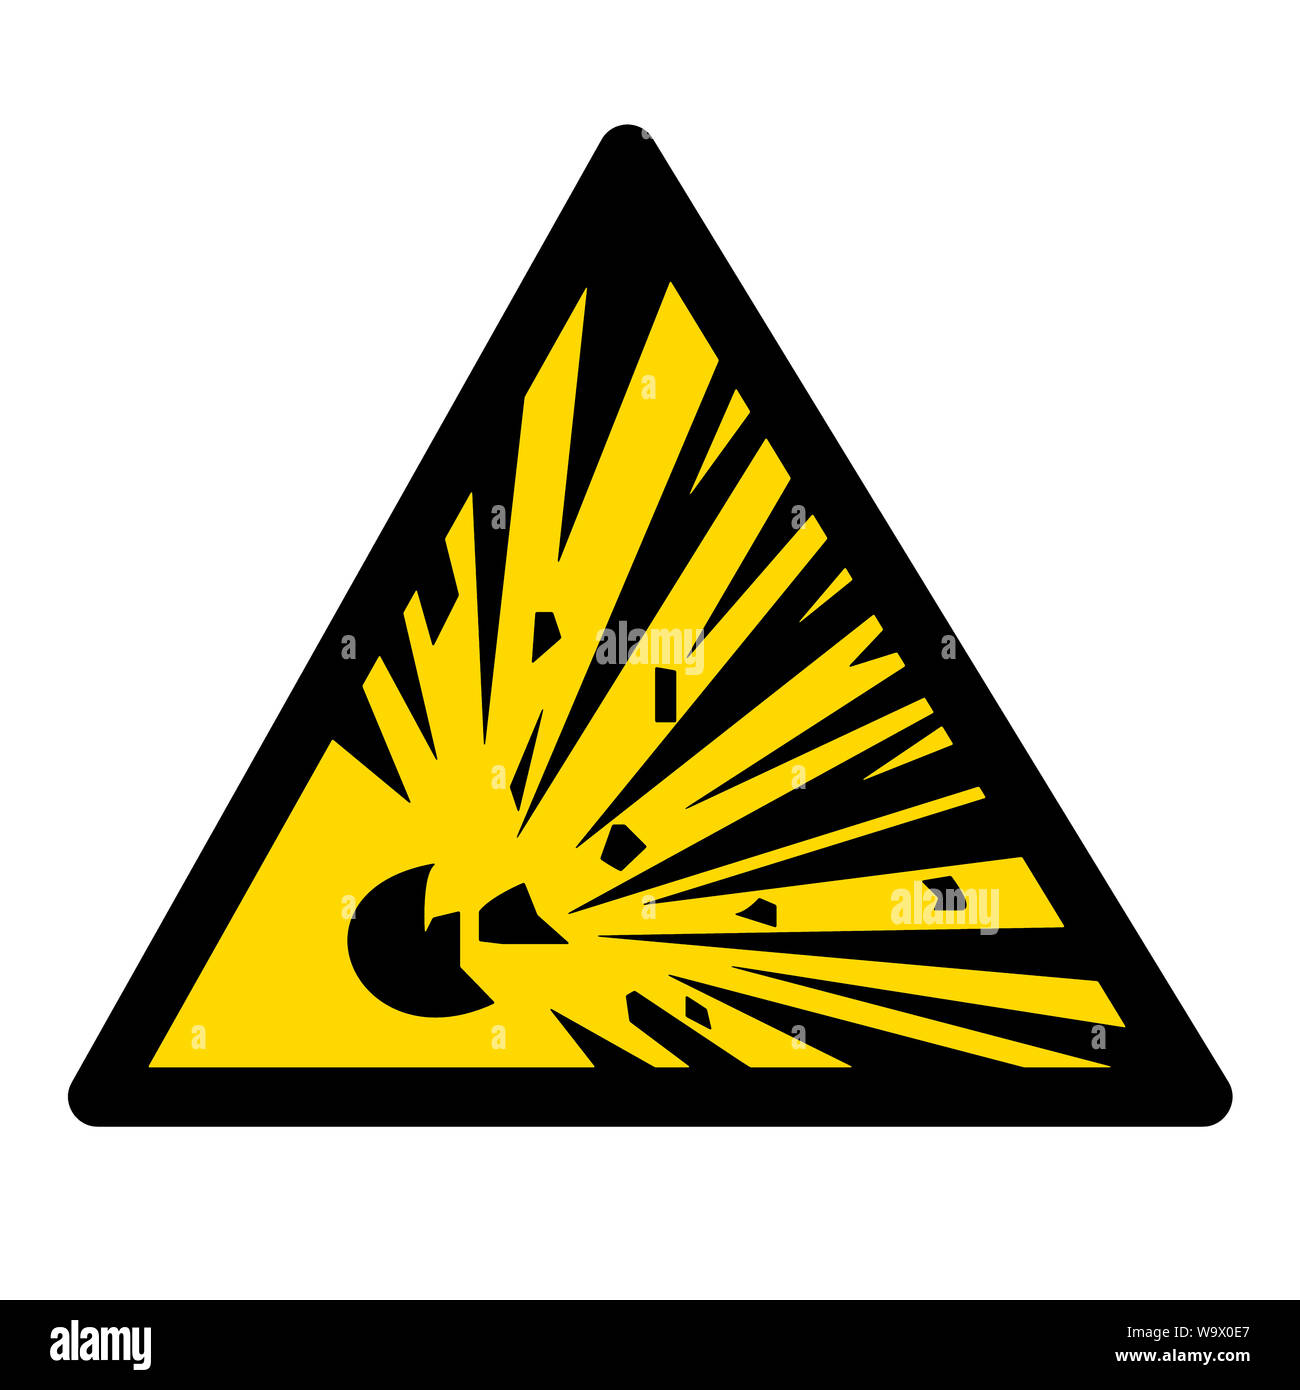 Risk of Explosion Sign Stock Photo